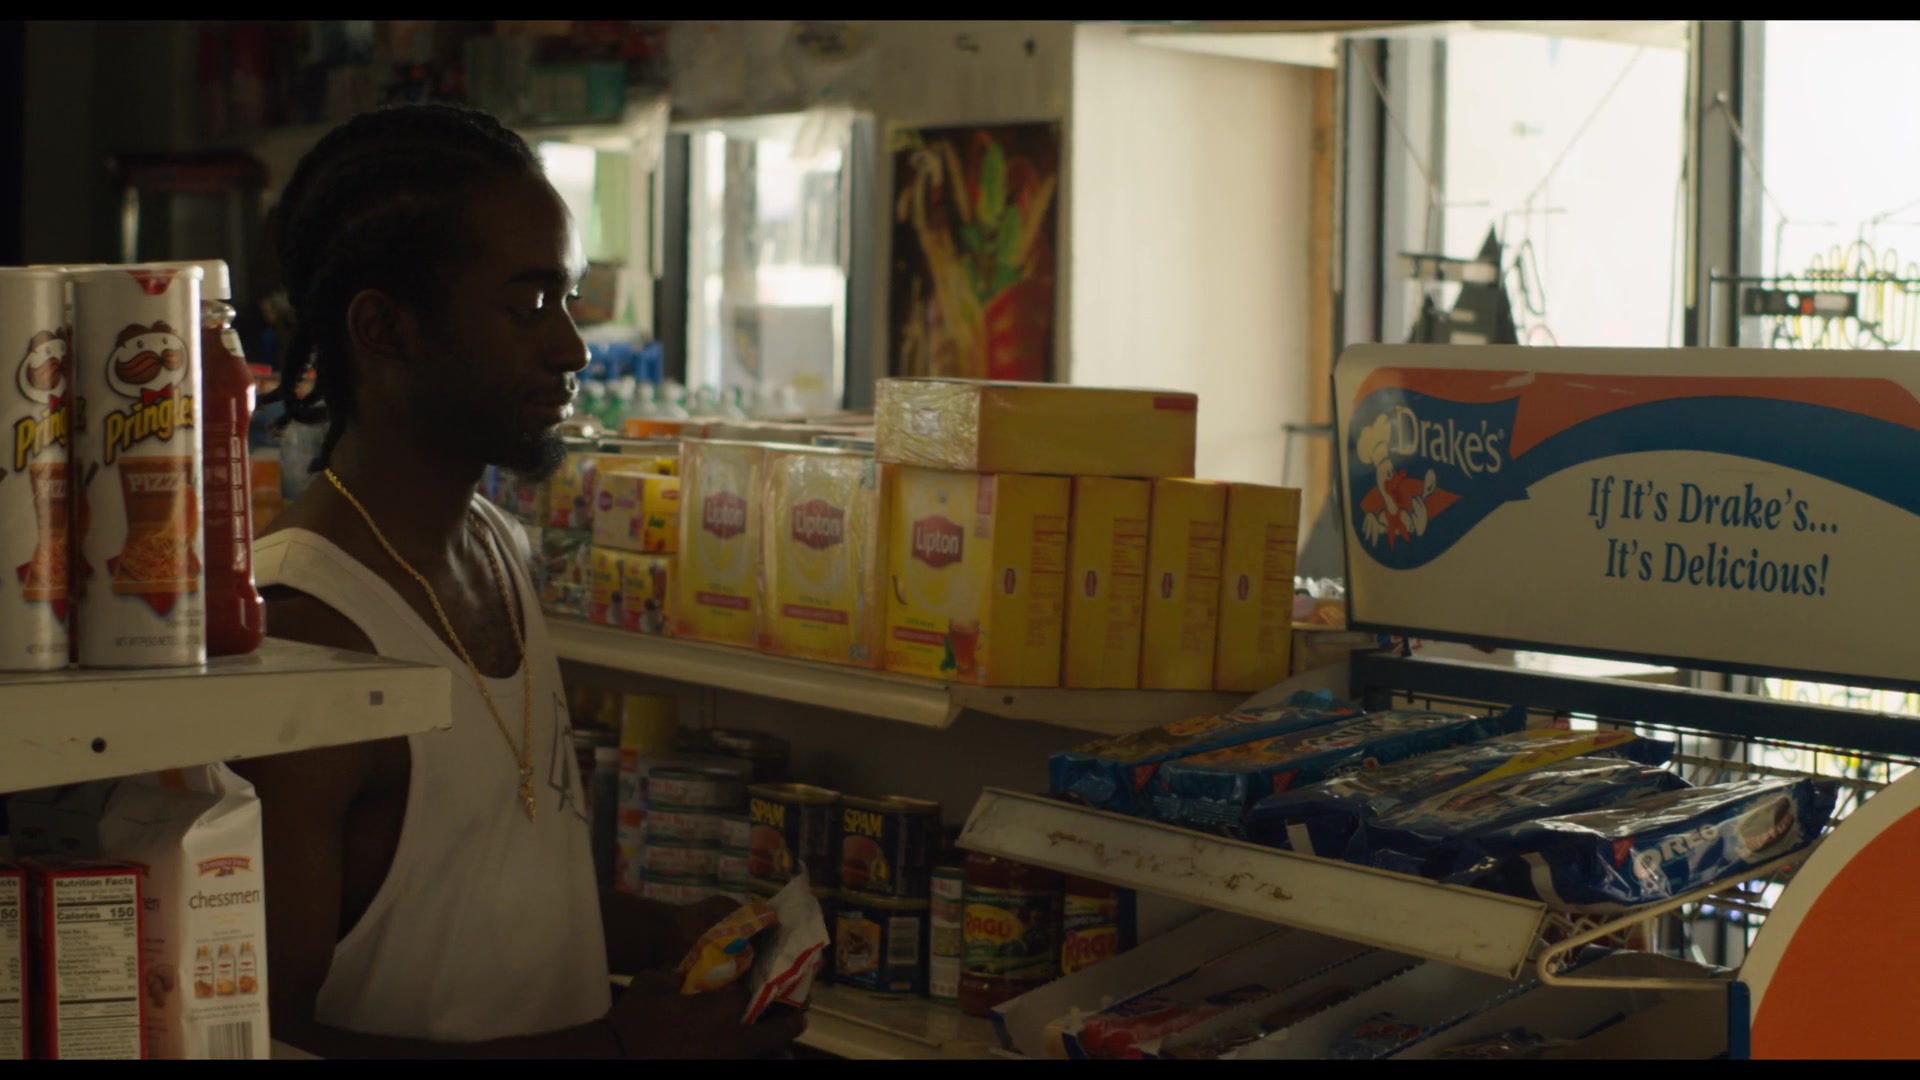 On May 18, 2019, I analyzed a Movie and spotted product placement: Pringles...